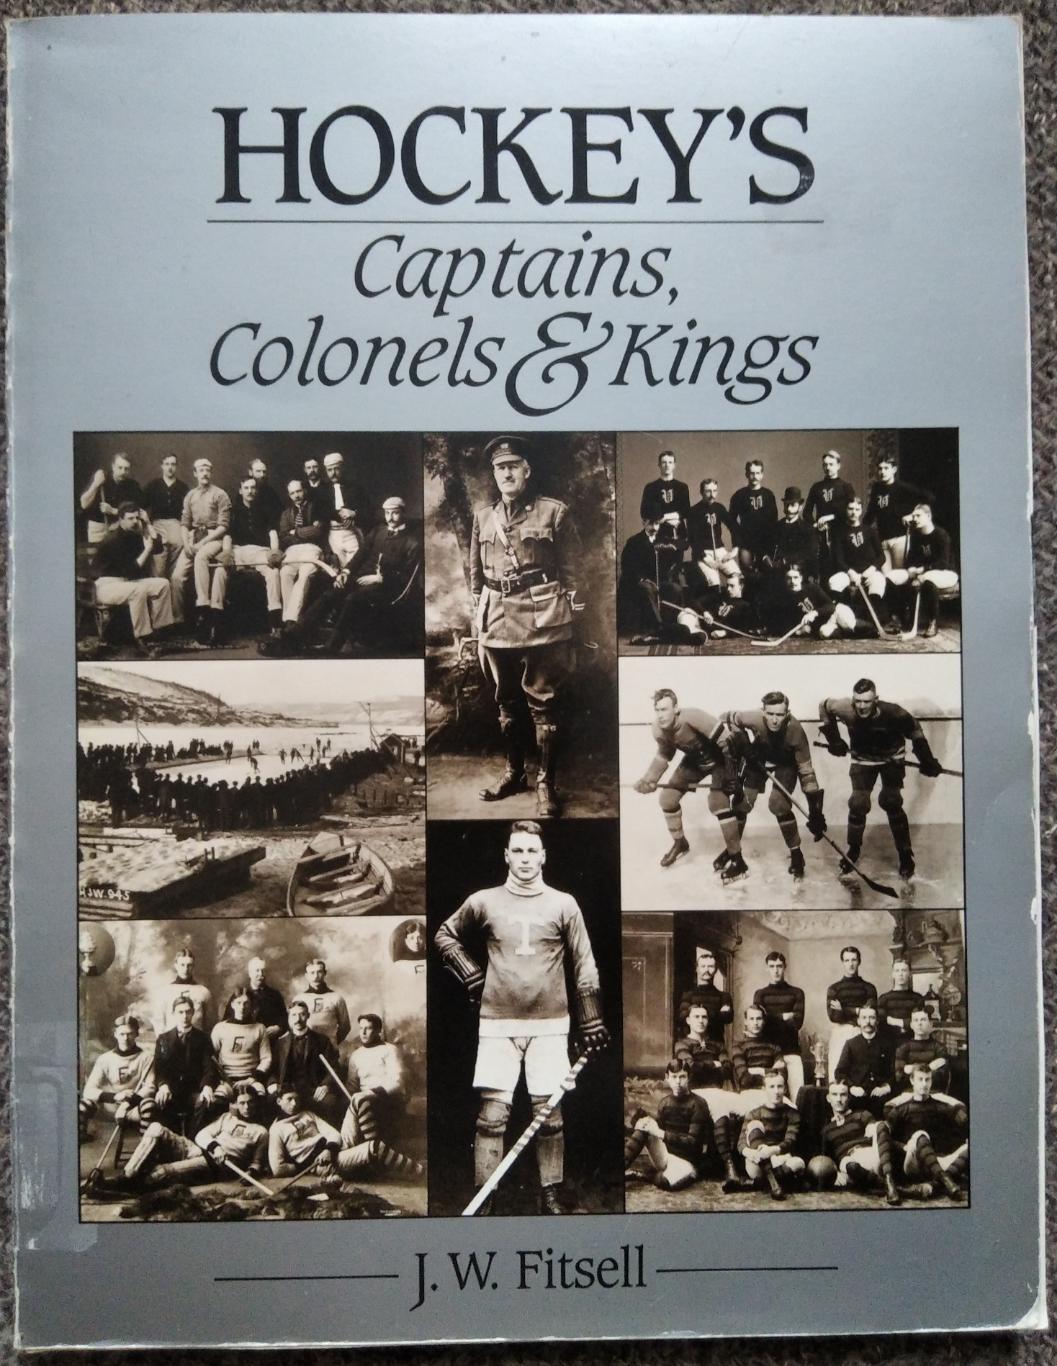 Hockey's Captains, Colonels and Kings (1987, NHL)